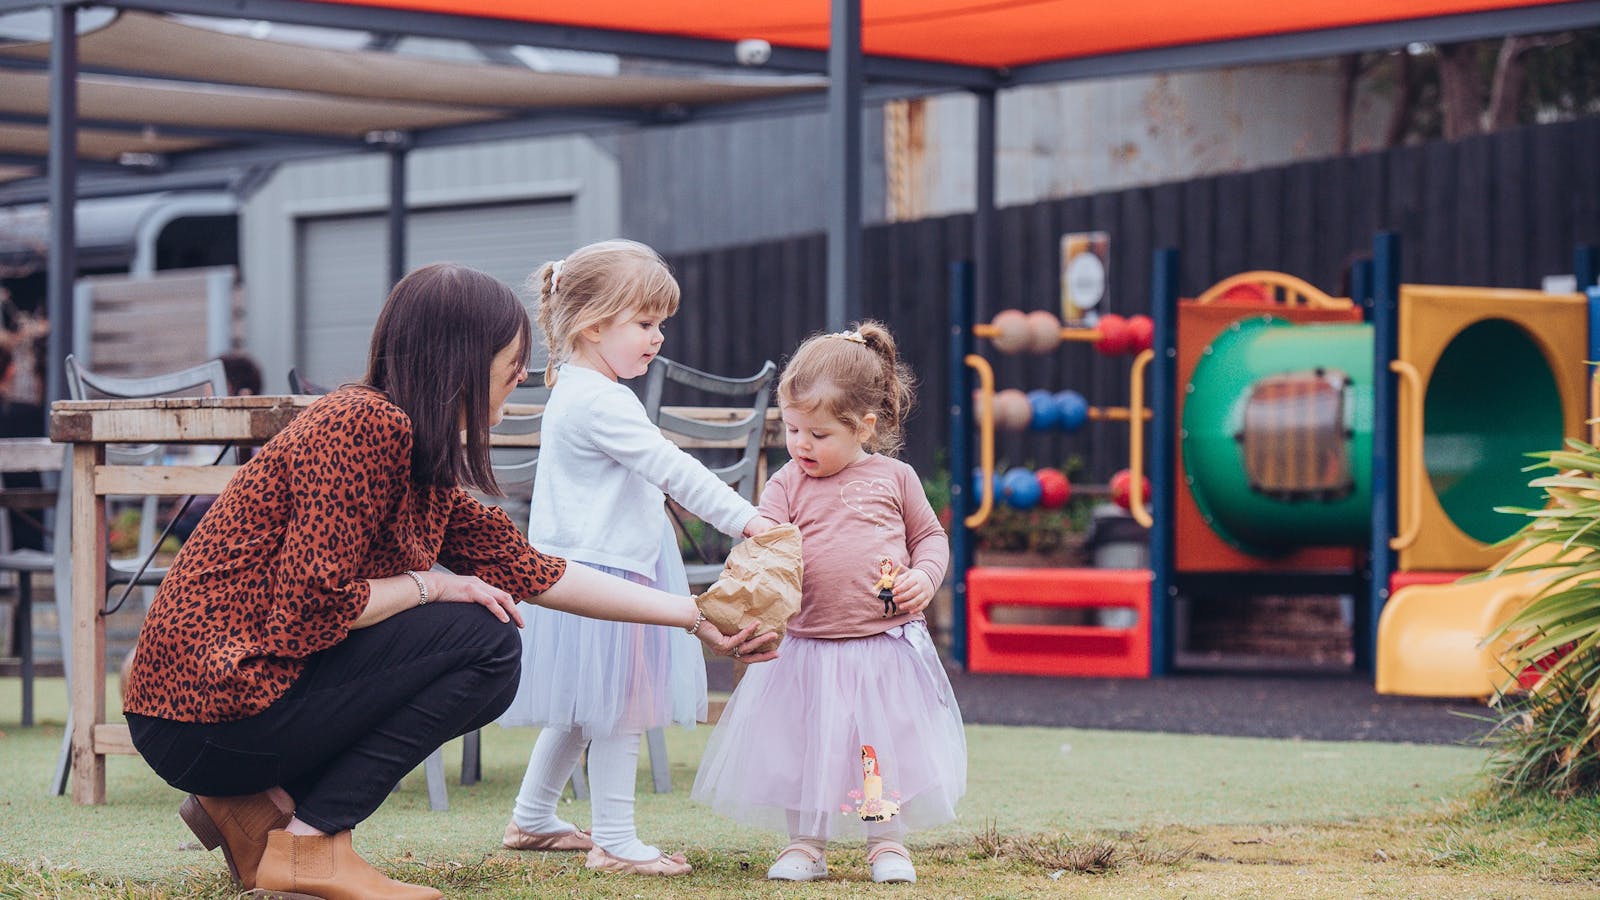 Puddleduck is family friendly with areas for families including a playground and duck feeding